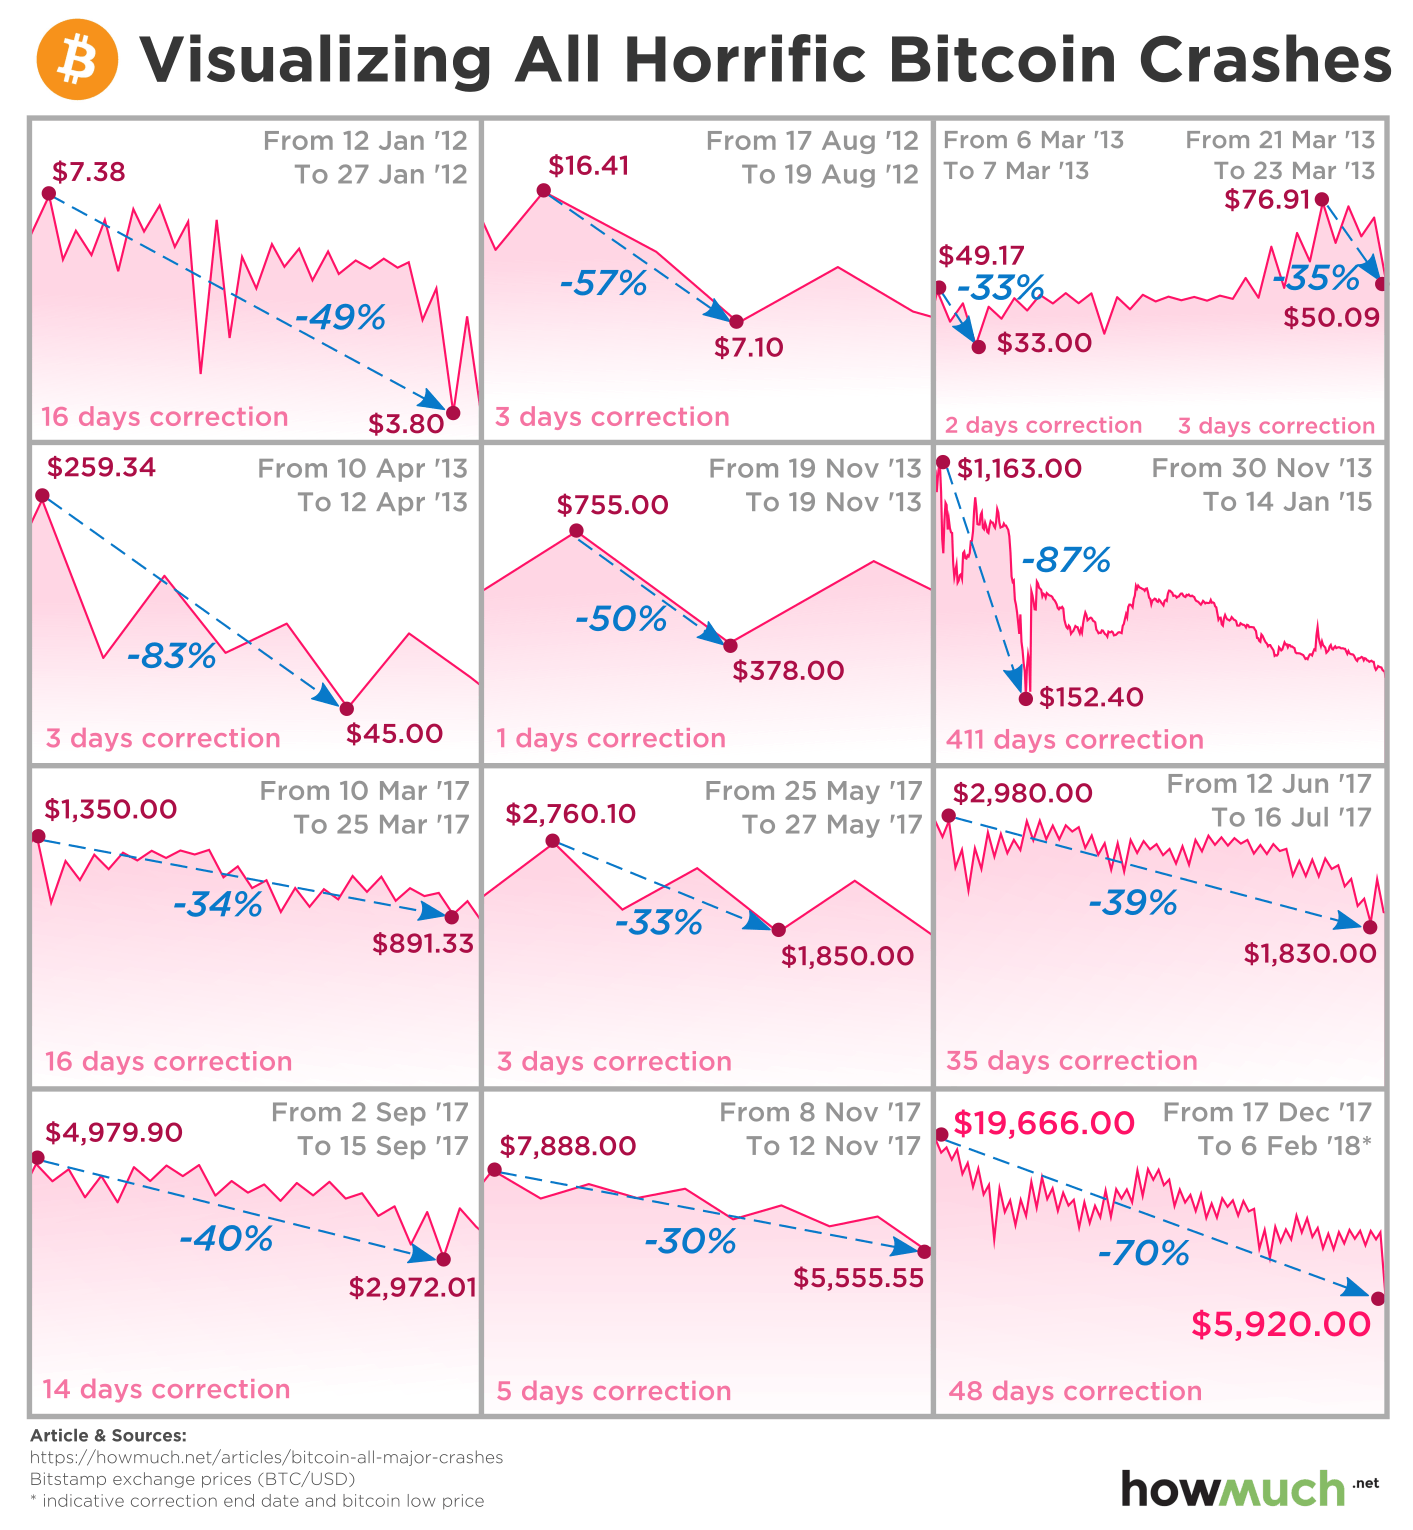 an illustrated history of bitcoin crashes